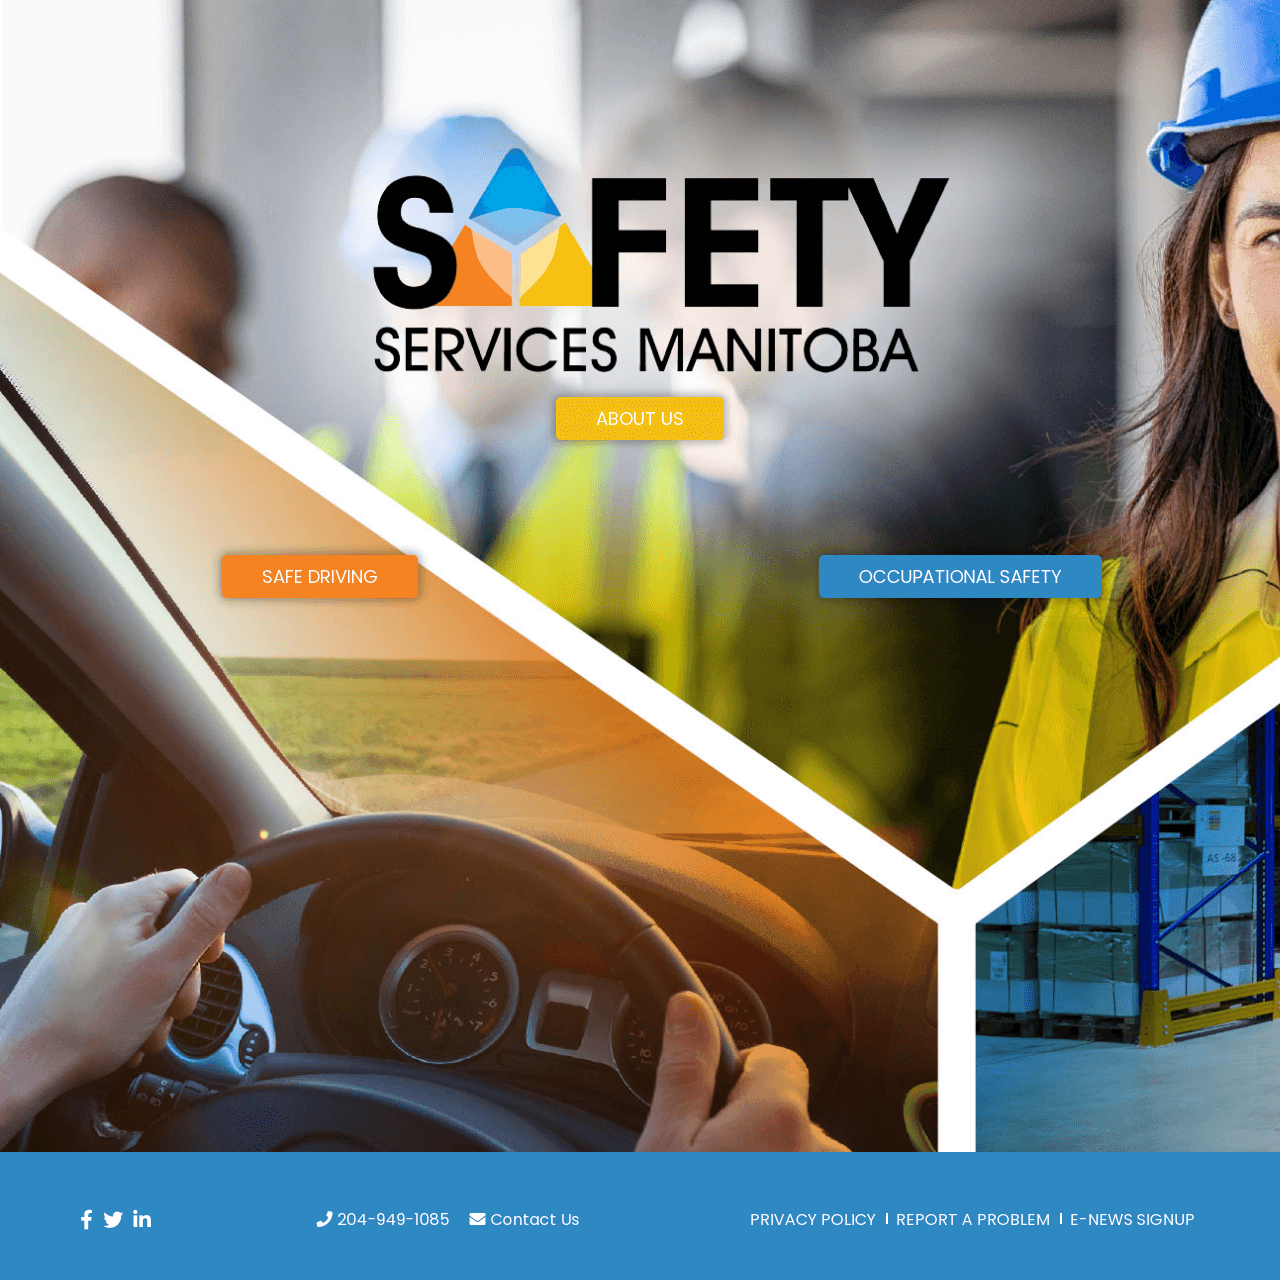 Safety Services MB website designed by 6P Marketing